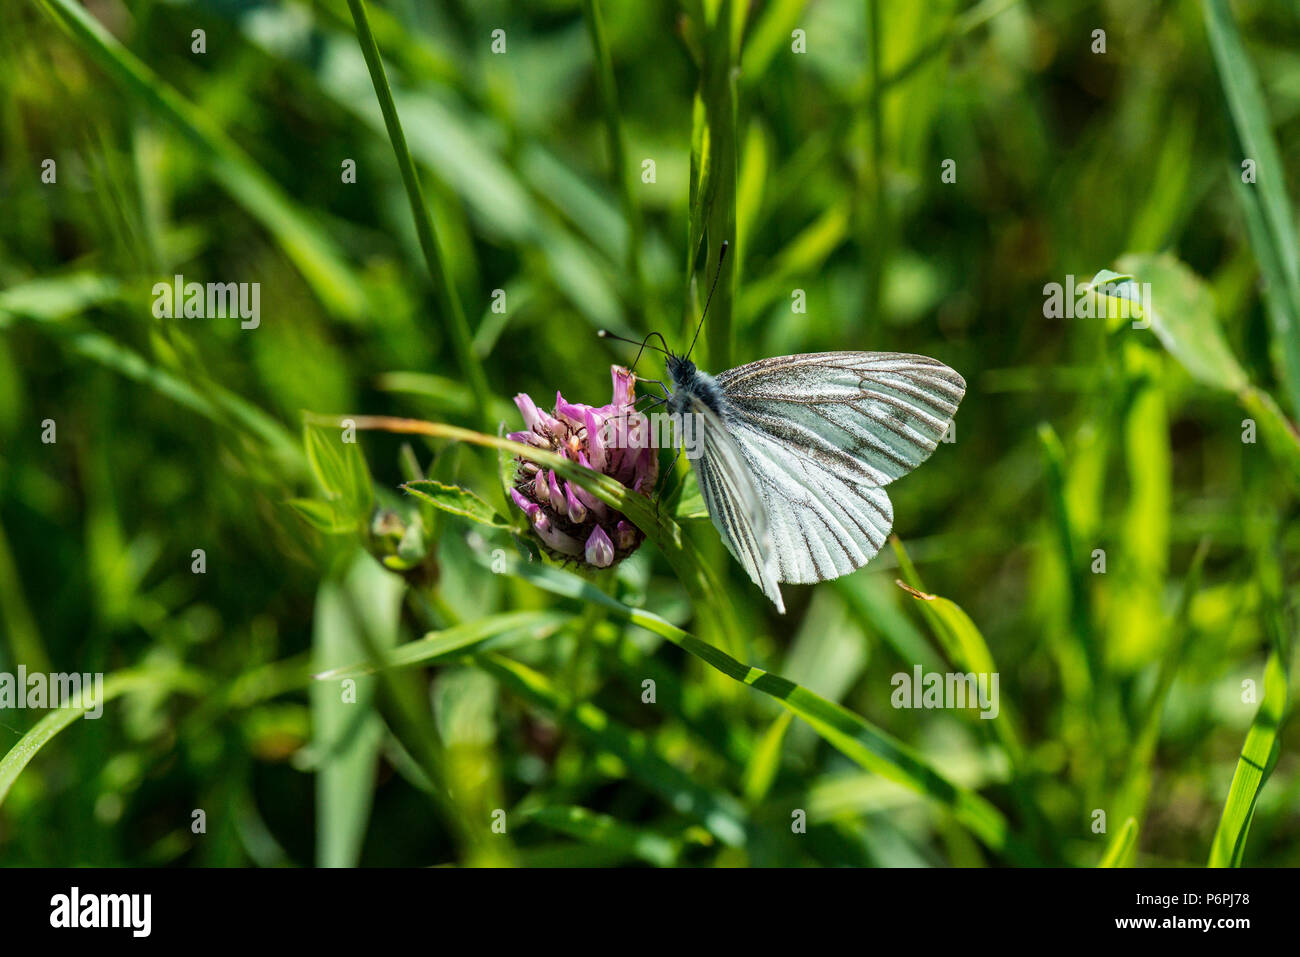 A female green-veined white butterfly (Pieris napi) on the flower of a red clover (Trifolium pratense) Stock Photo